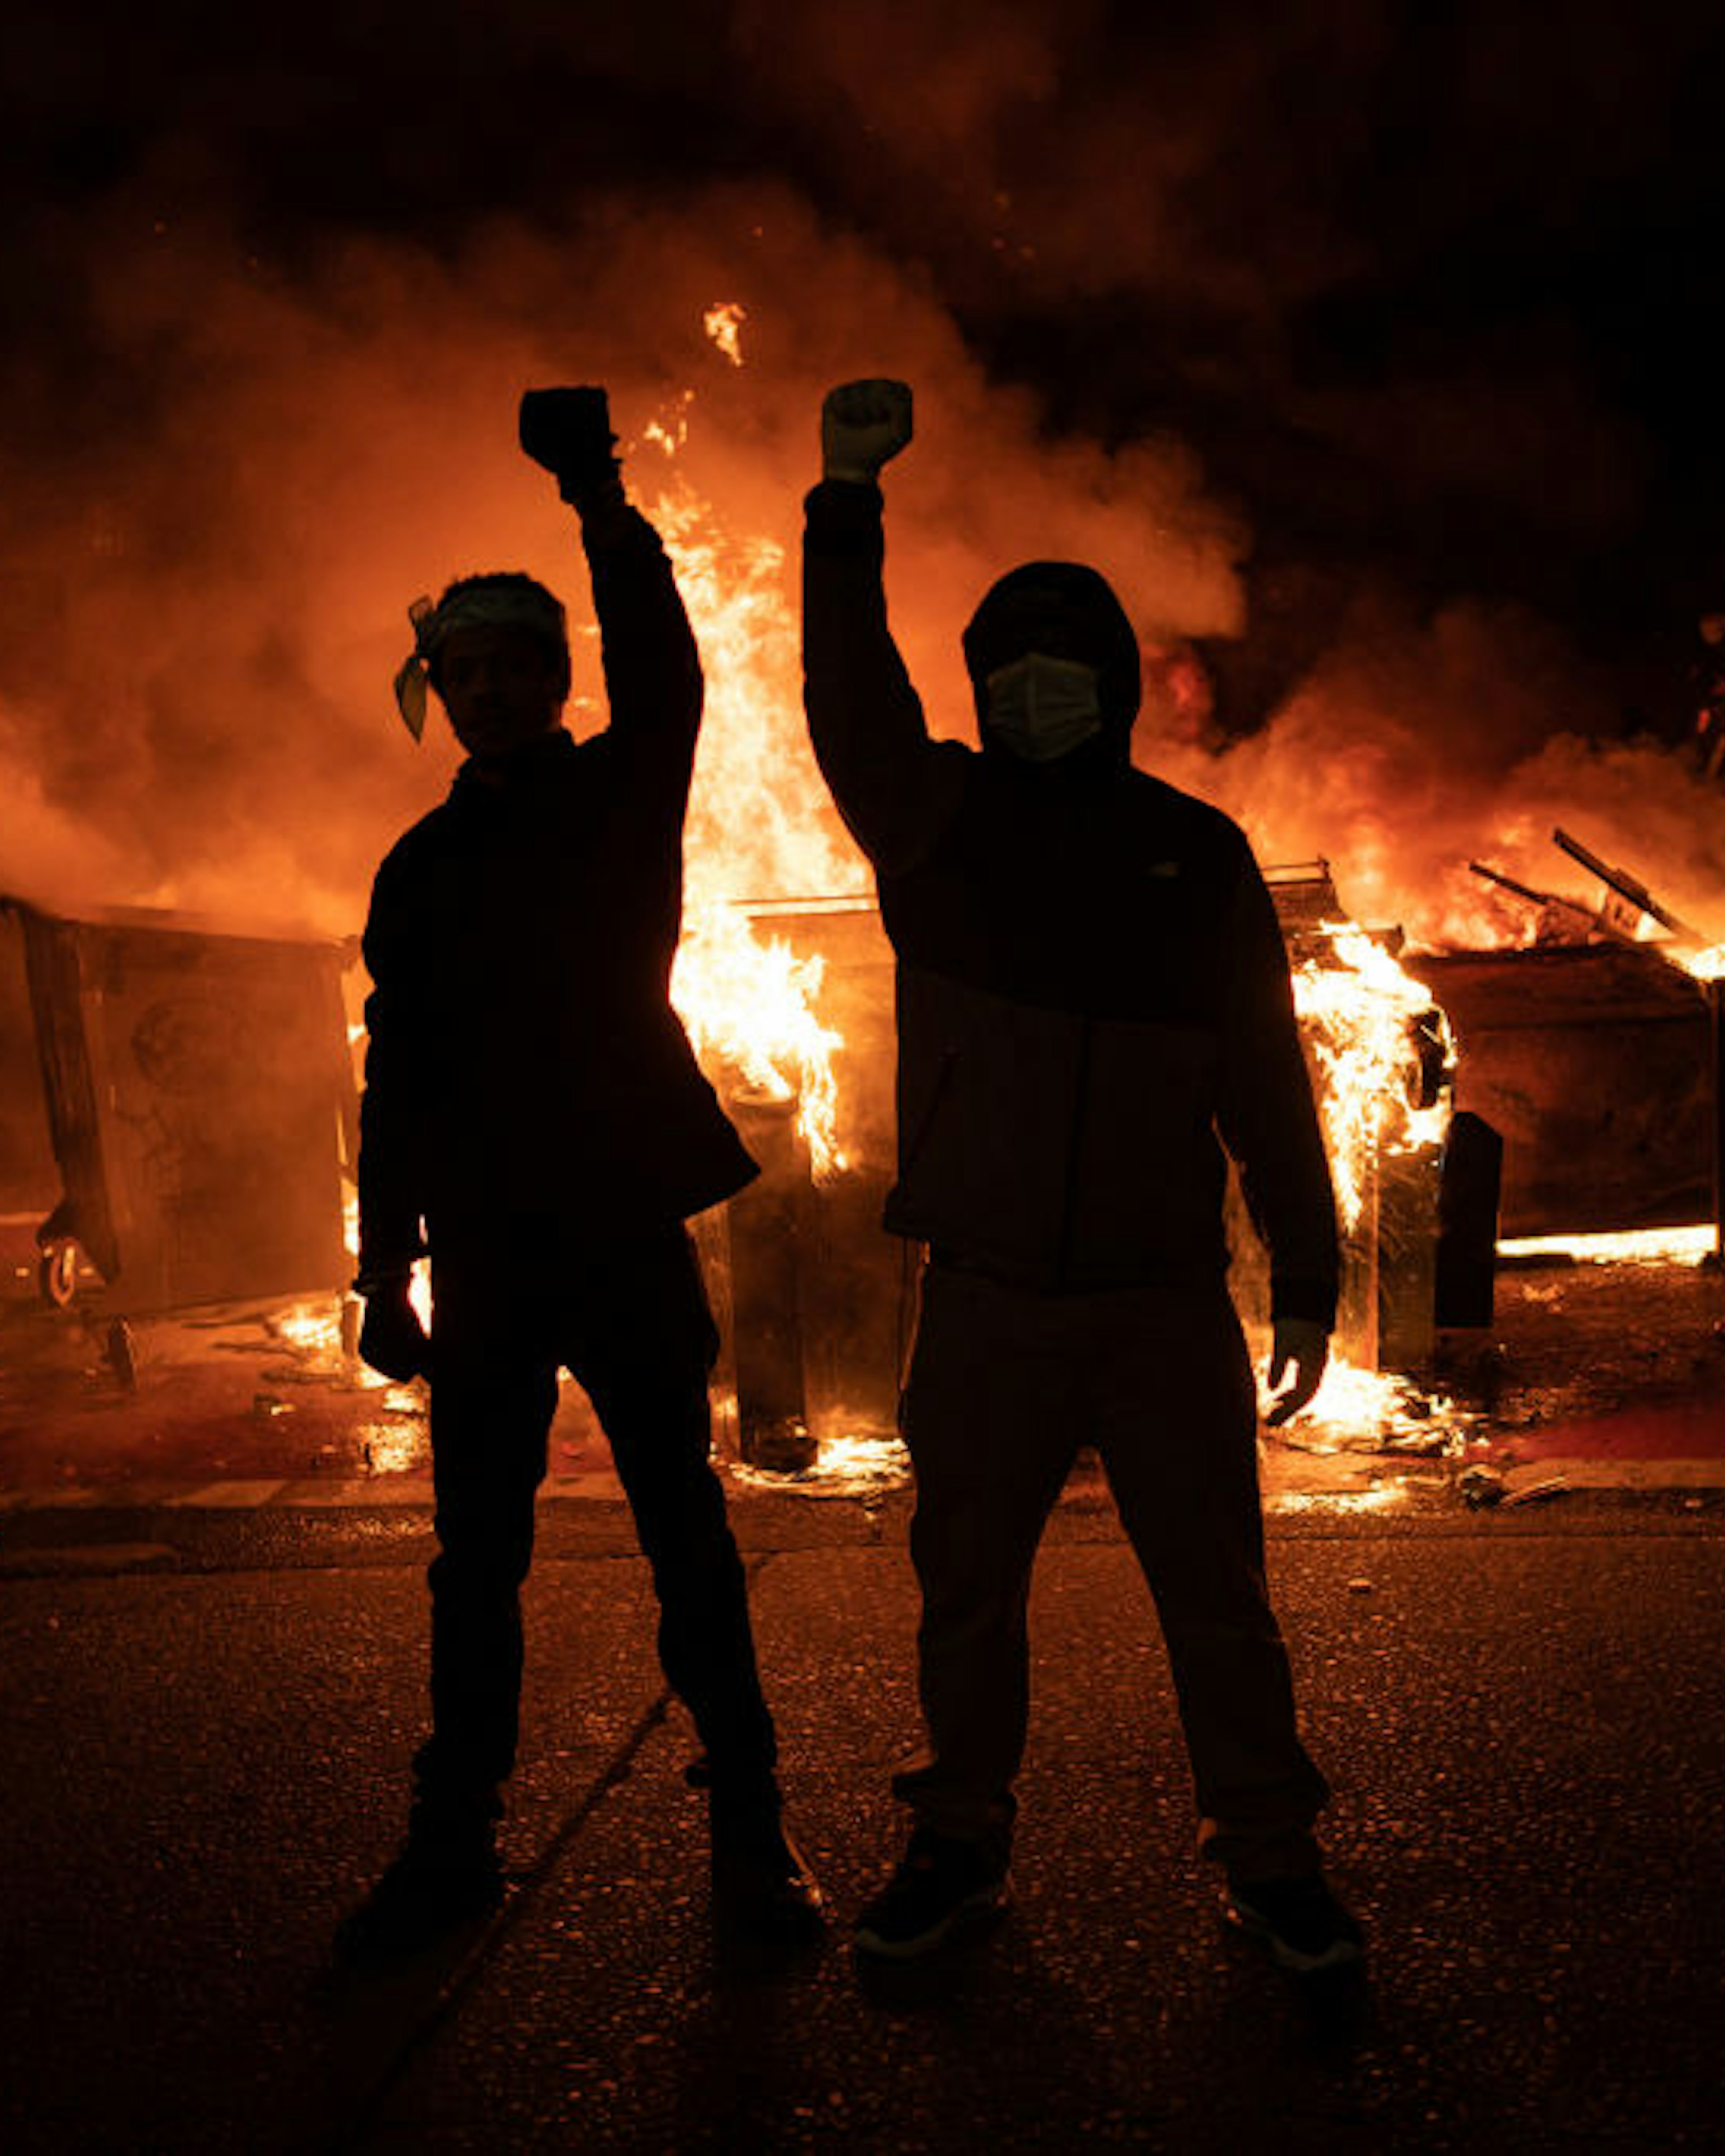 SEATTLE, WA - JUNE 08: Demonstrators raise their fists as a fire burns in the street after clashes with law enforcement near the Seattle Police Departments East Precinct shortly after midnight on June 8, 2020 in Seattle, Washington. Earlier in the evening, a suspect drove into the crowd of protesters and shot one person, which happened after a day of peaceful protests across the city. Later, police and protesters clashed violently during ongoing Black Lives Matter demonstrations following the death of George Floyd. (Photo by David Ryder/Getty Images)